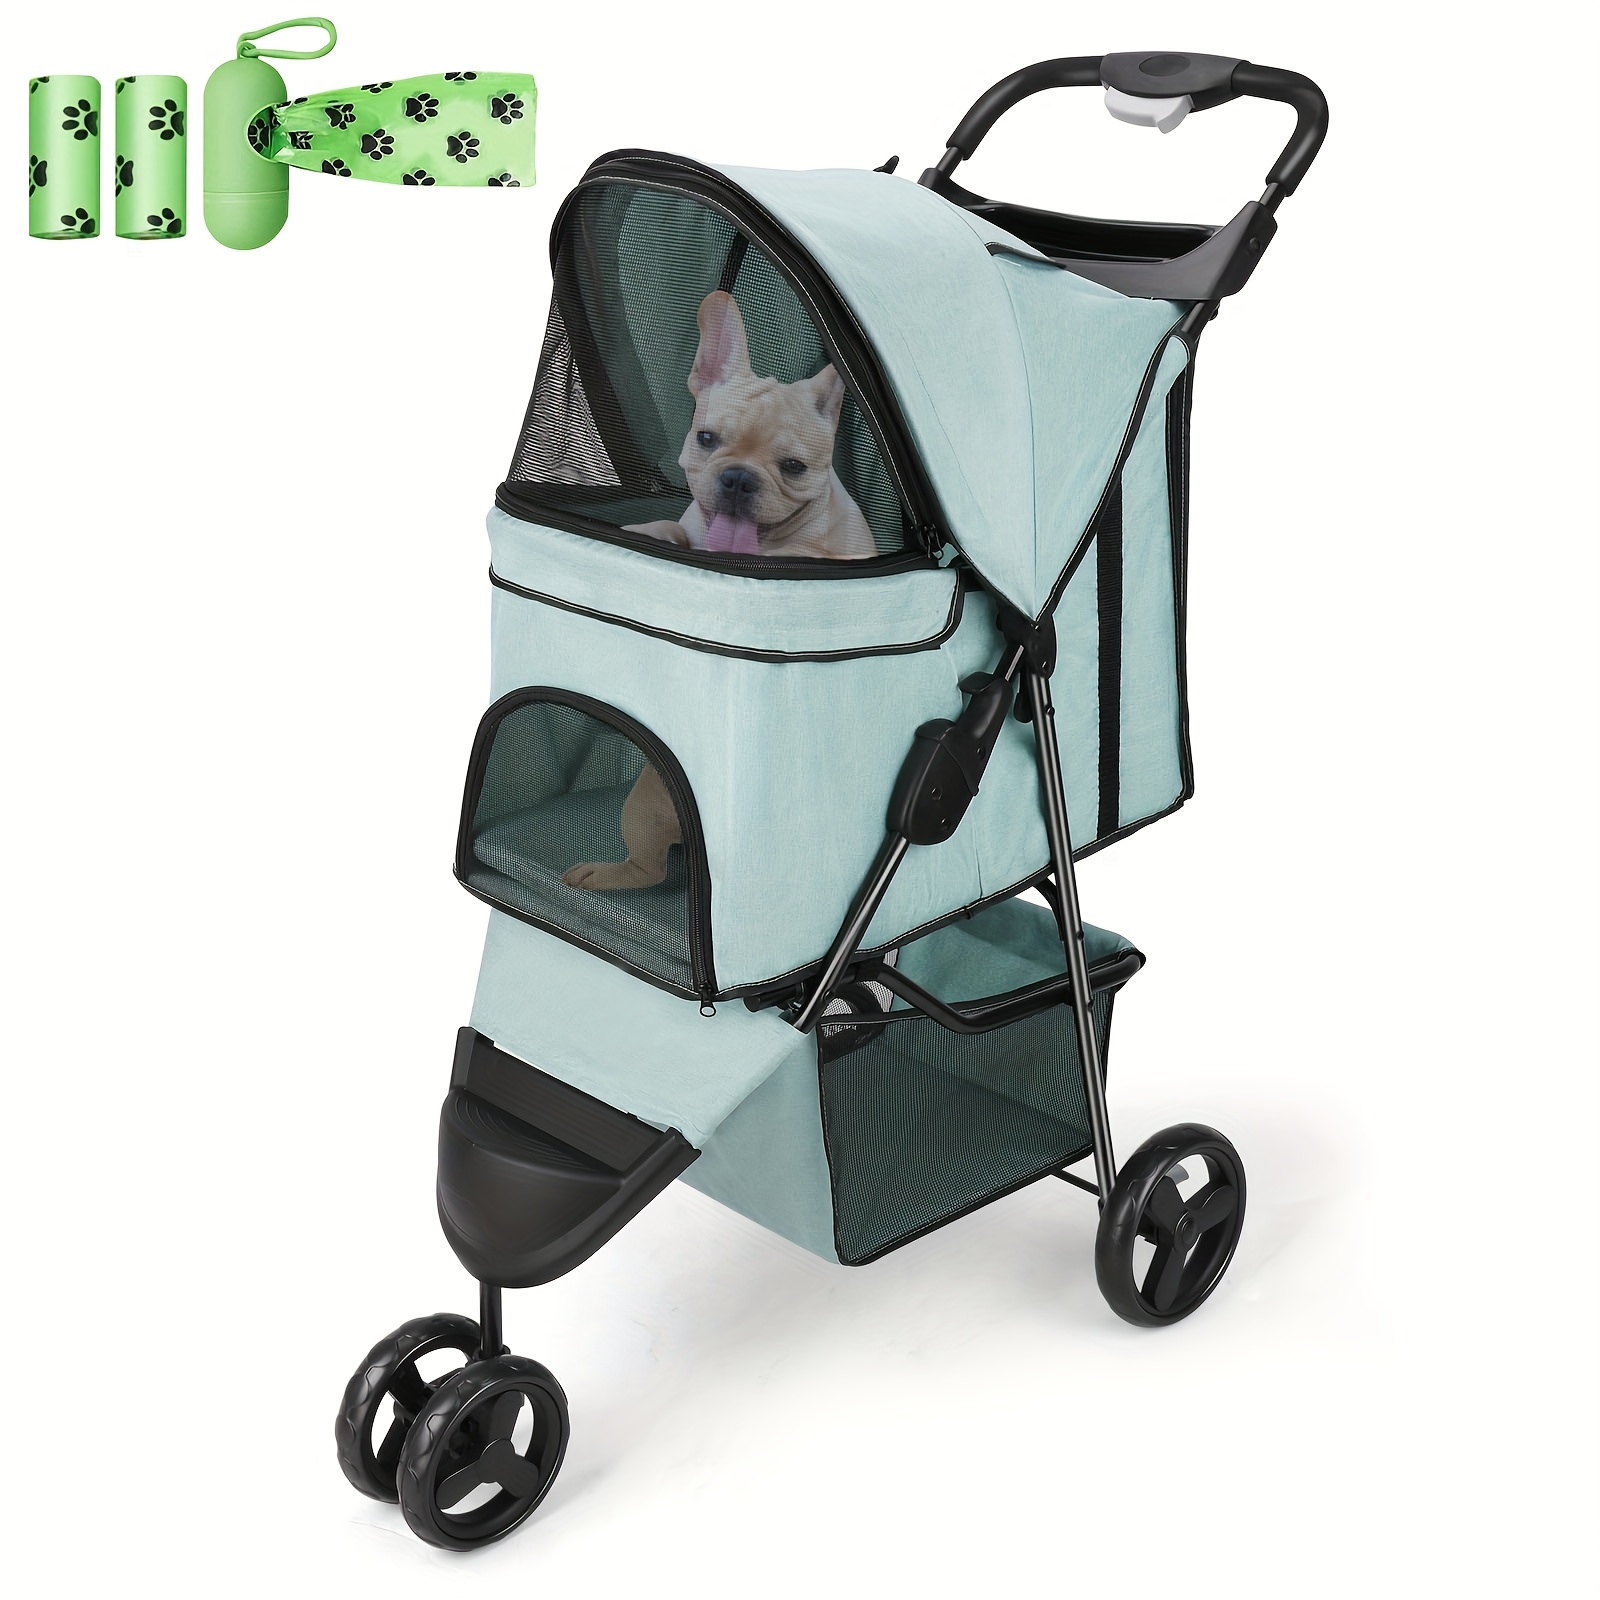 

Wedyvko Dog Stroller, Pet Stroller For Small Dogs Cats, Up To 33 Lbs With Storage Basket & Cup Holder